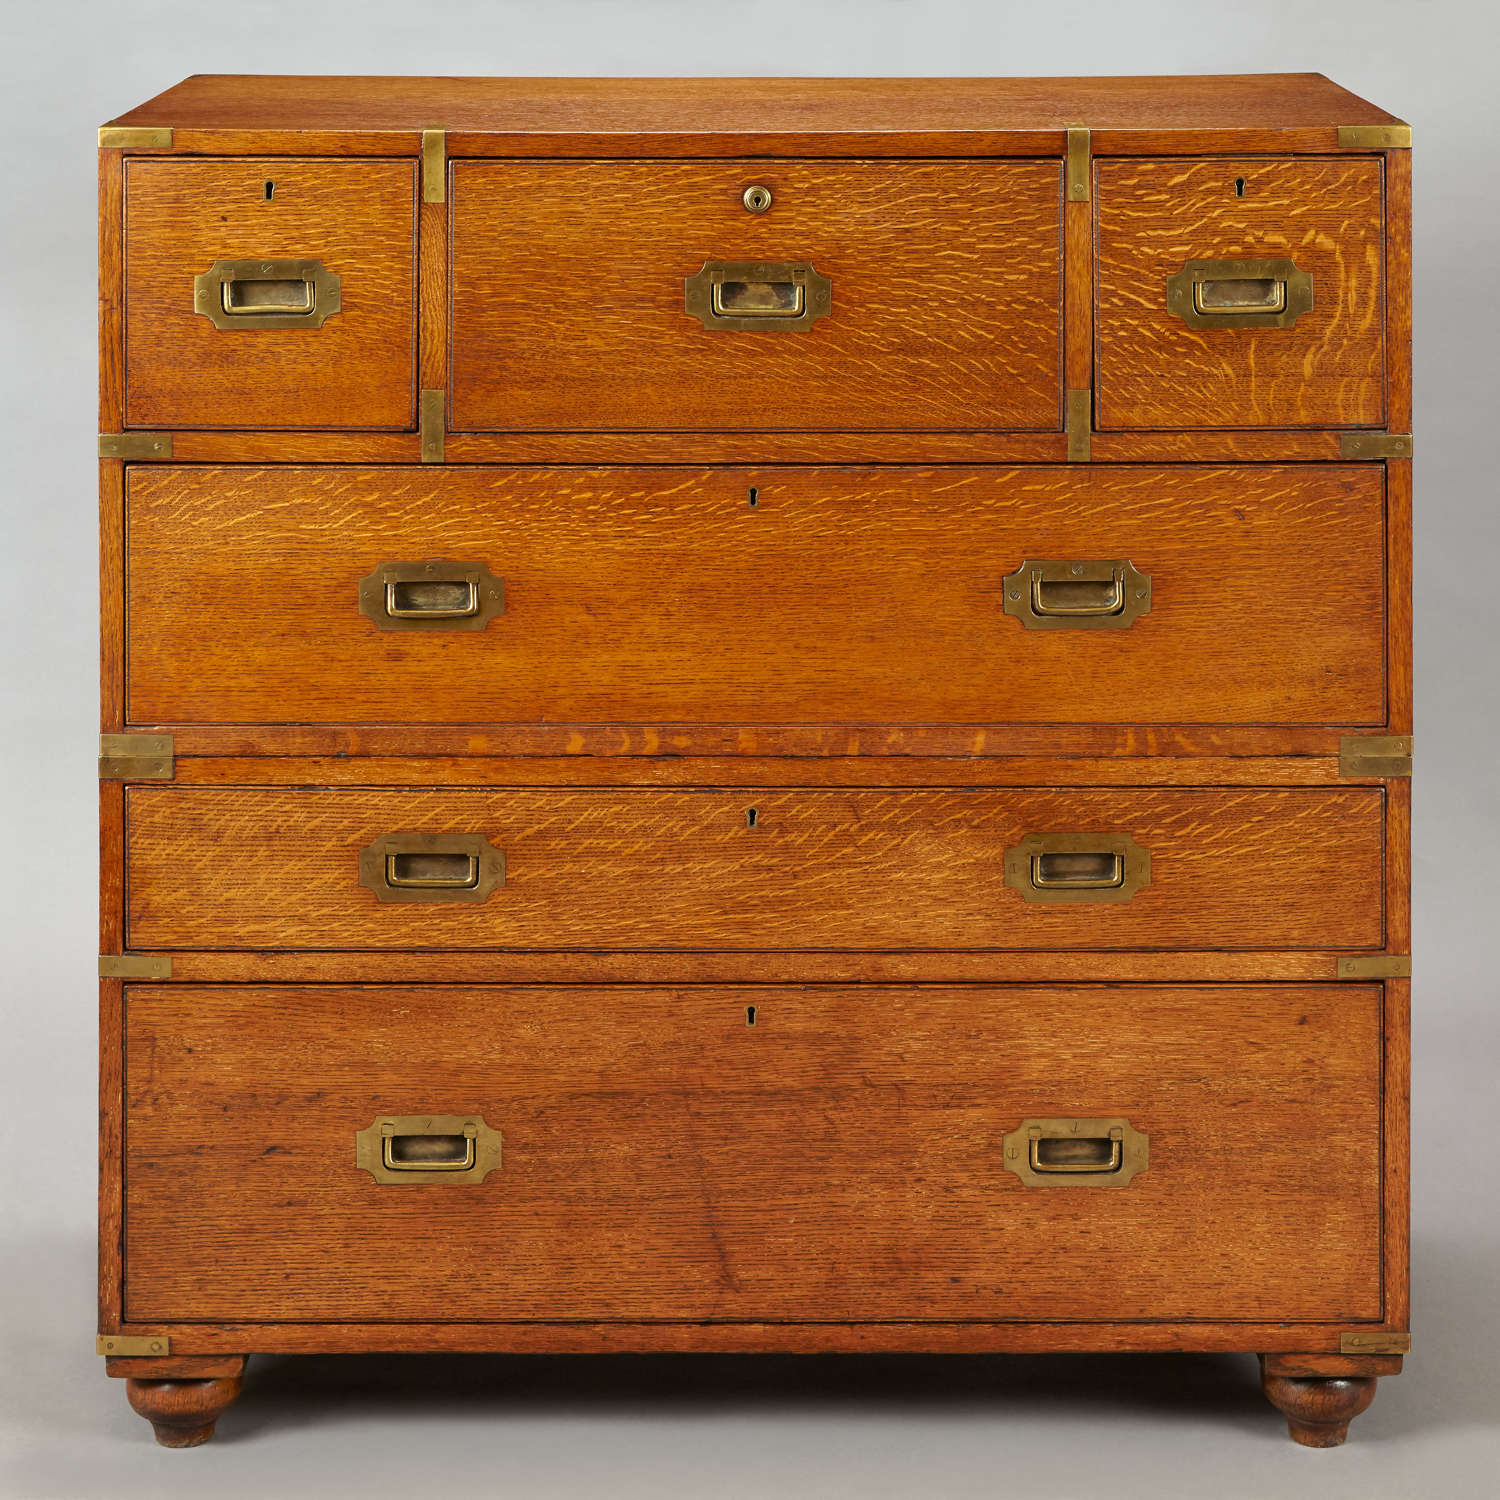 19th Century brass bound oak military/ campaign chest with secretaire